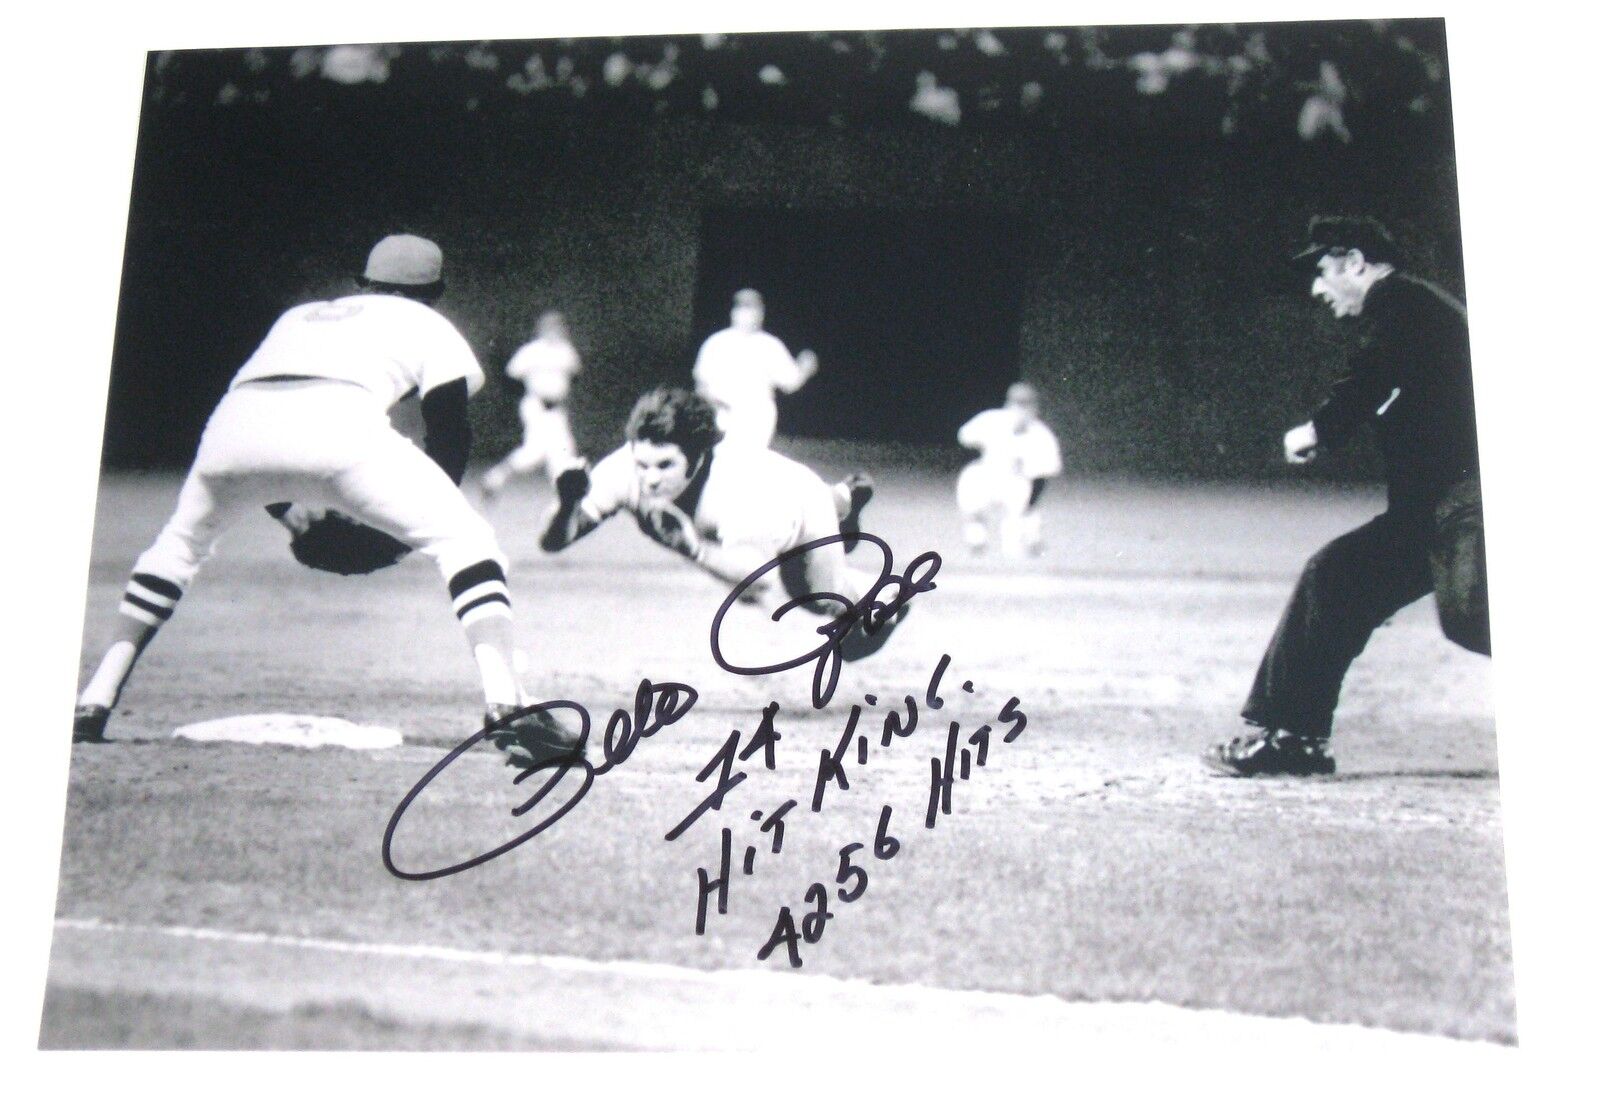 PETE ROSE HAND SIGNED AUTOGRAPHED 8X10 FENWAY PARK Photo Poster painting WITH PROOF AND COA